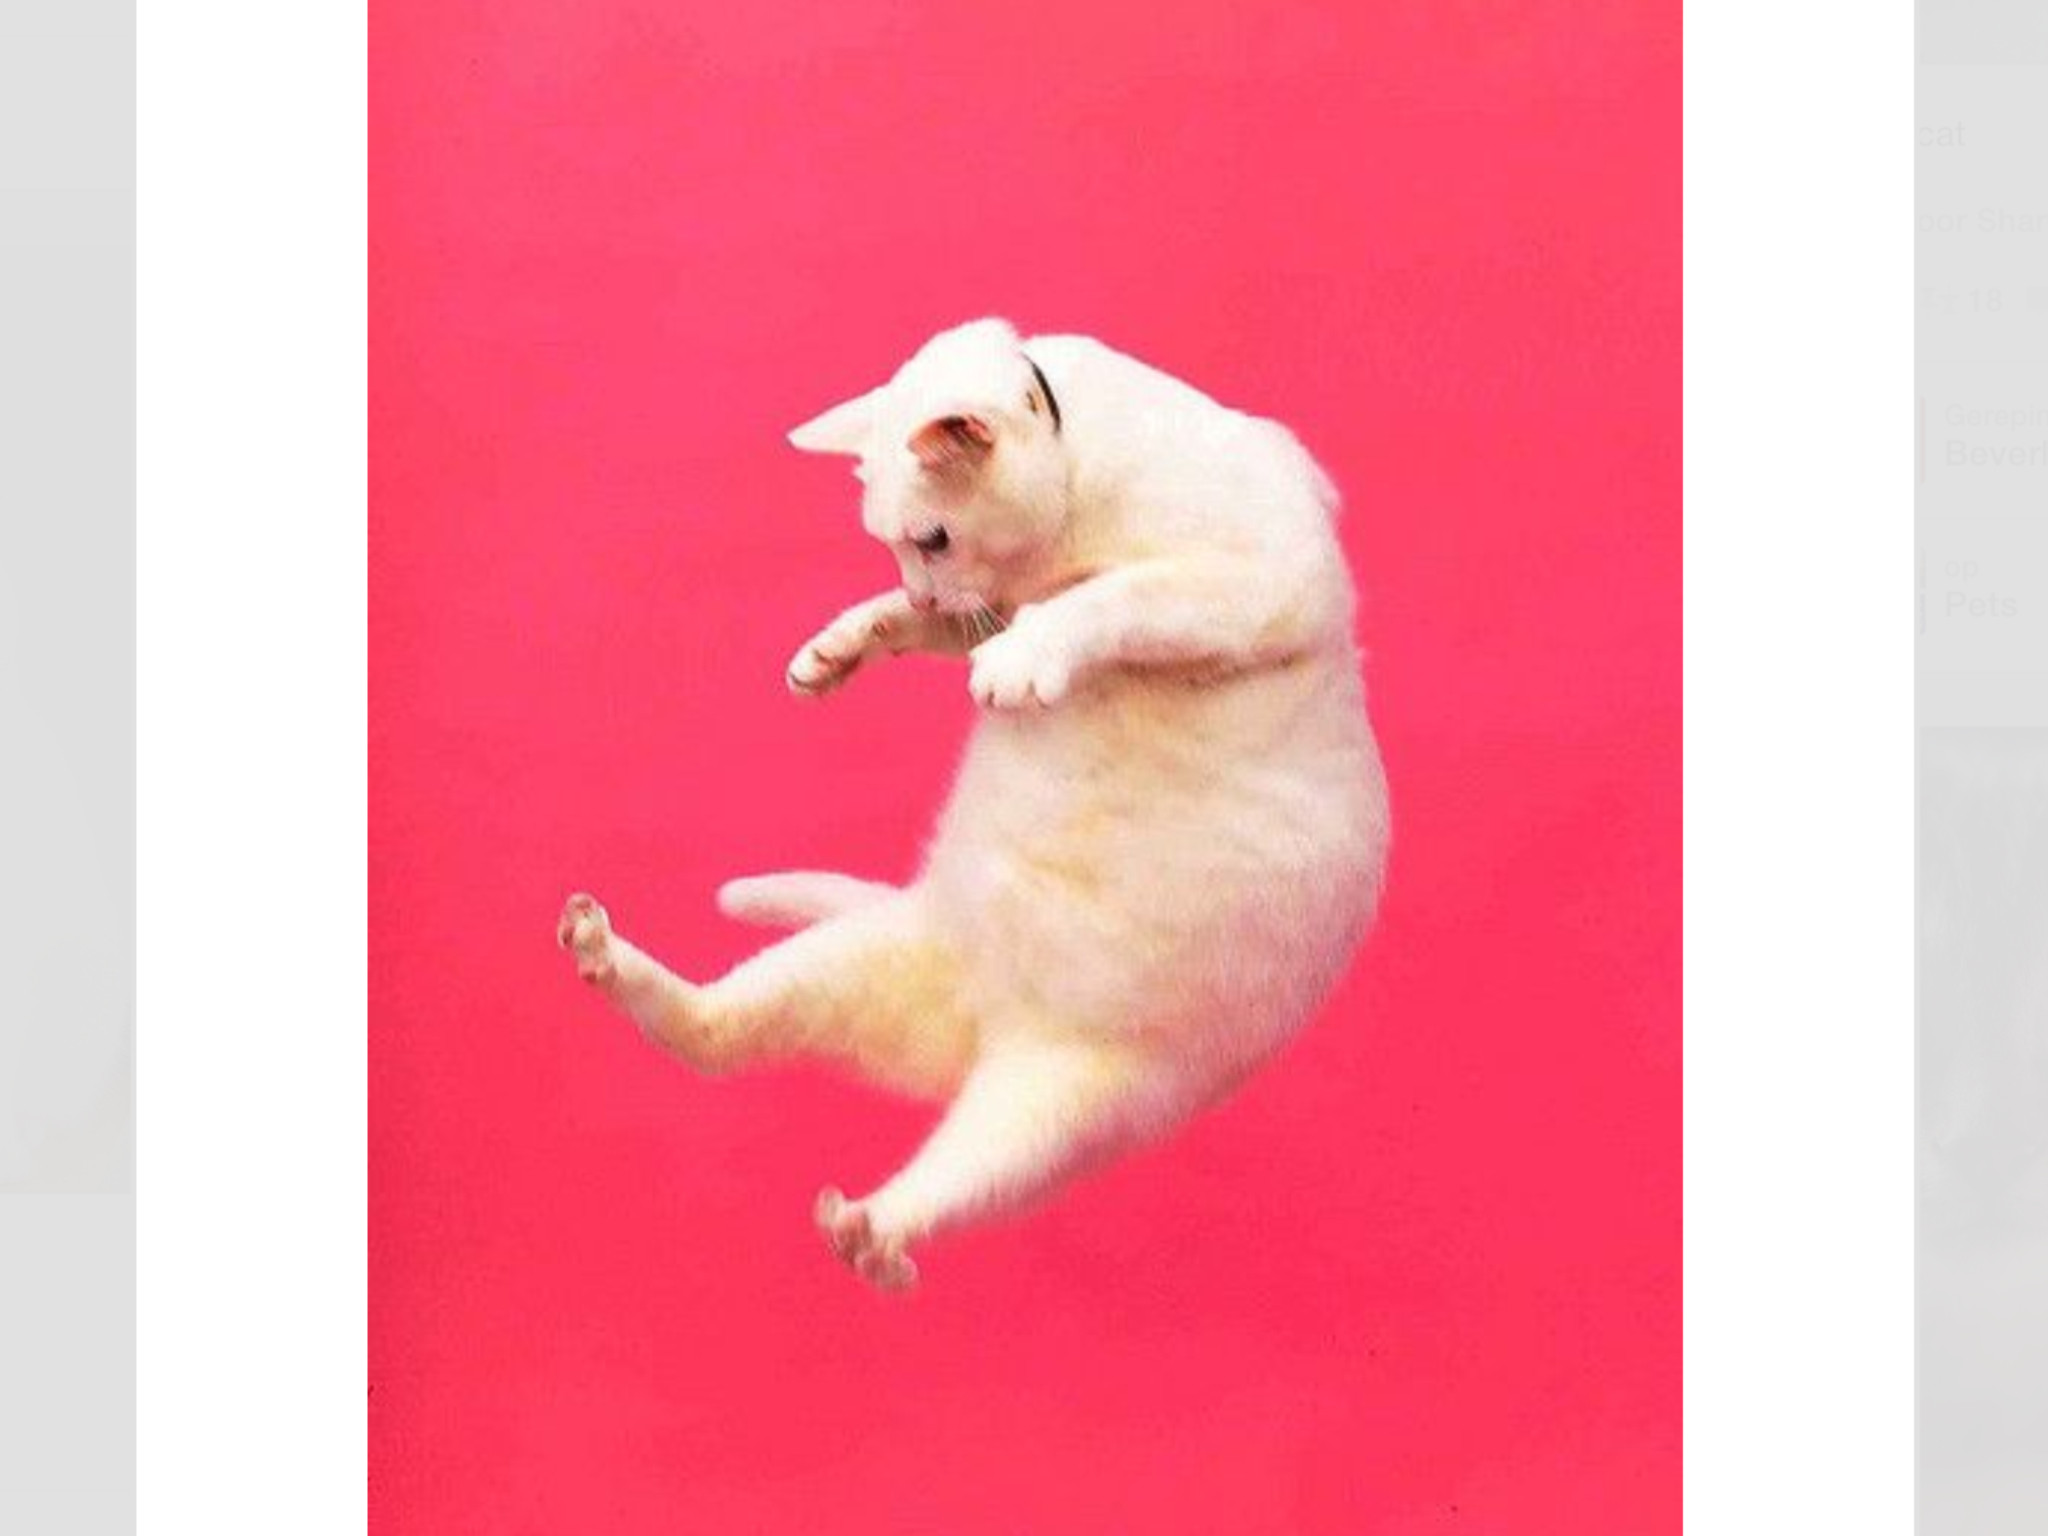 2048x1536 Hot pink jumping white cat iphone phone background wallpaper lock screen